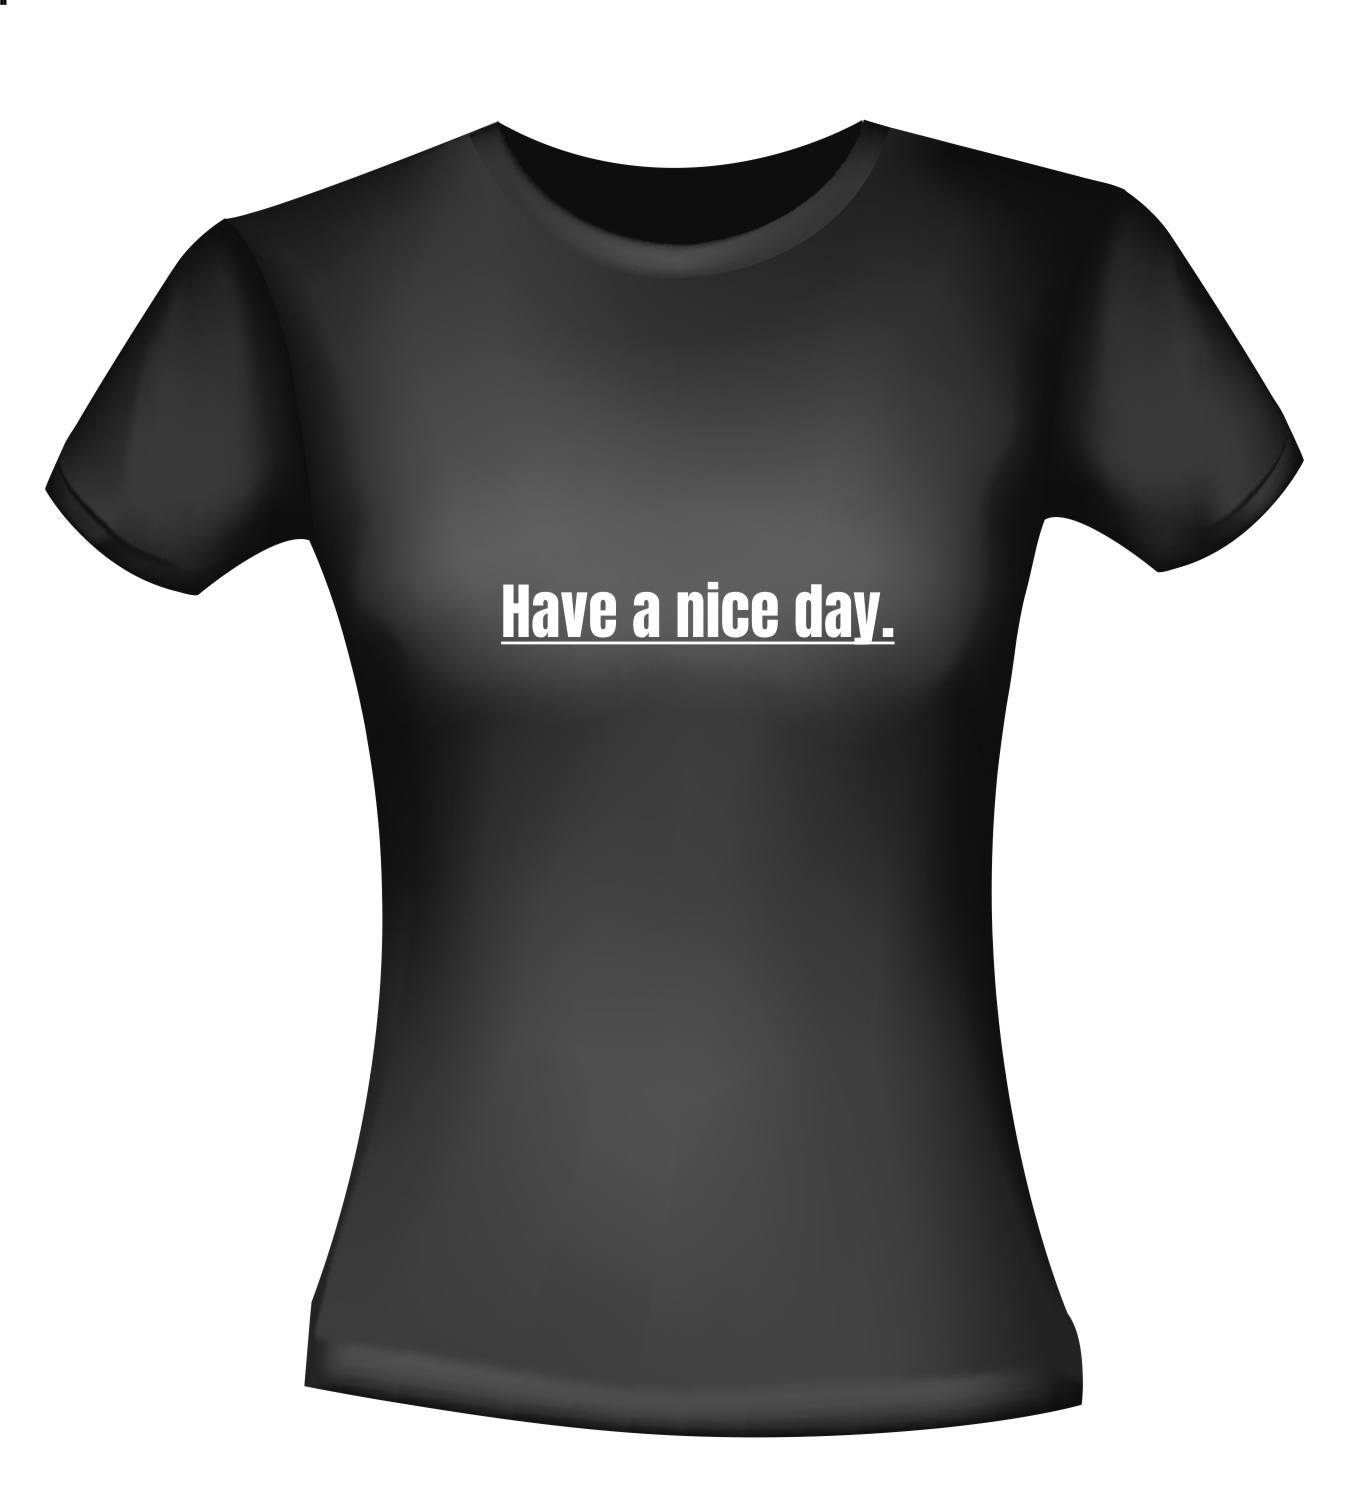 Have a nice day T-shirt fijne dag